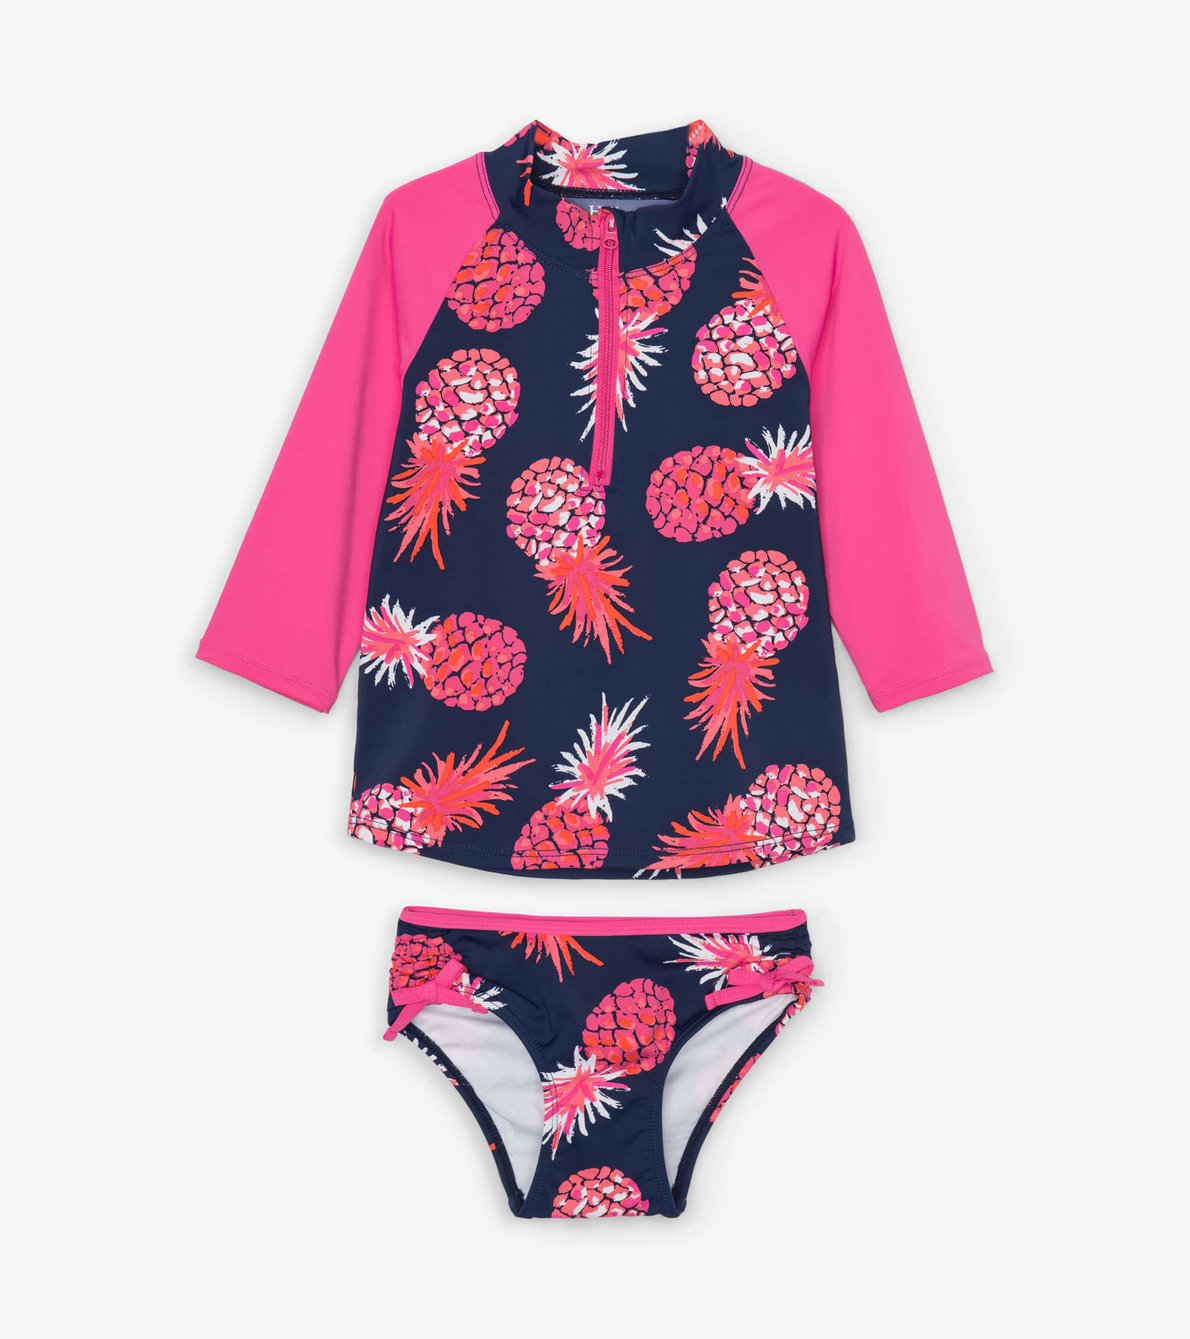 View larger image of Party Pineapples Rashguard Set